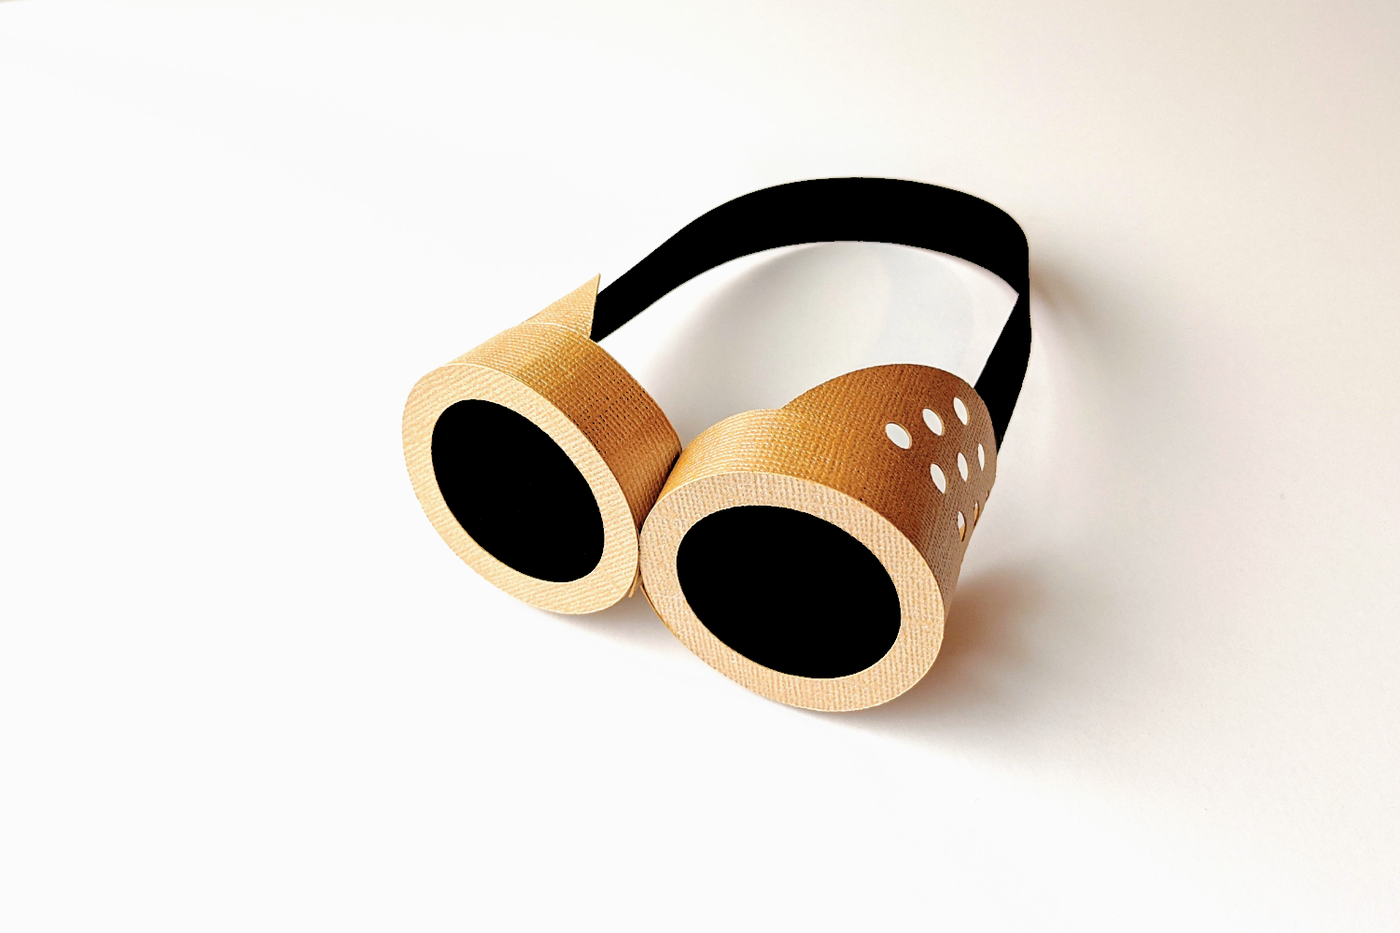 A pair of steampunk goggles made out of paper